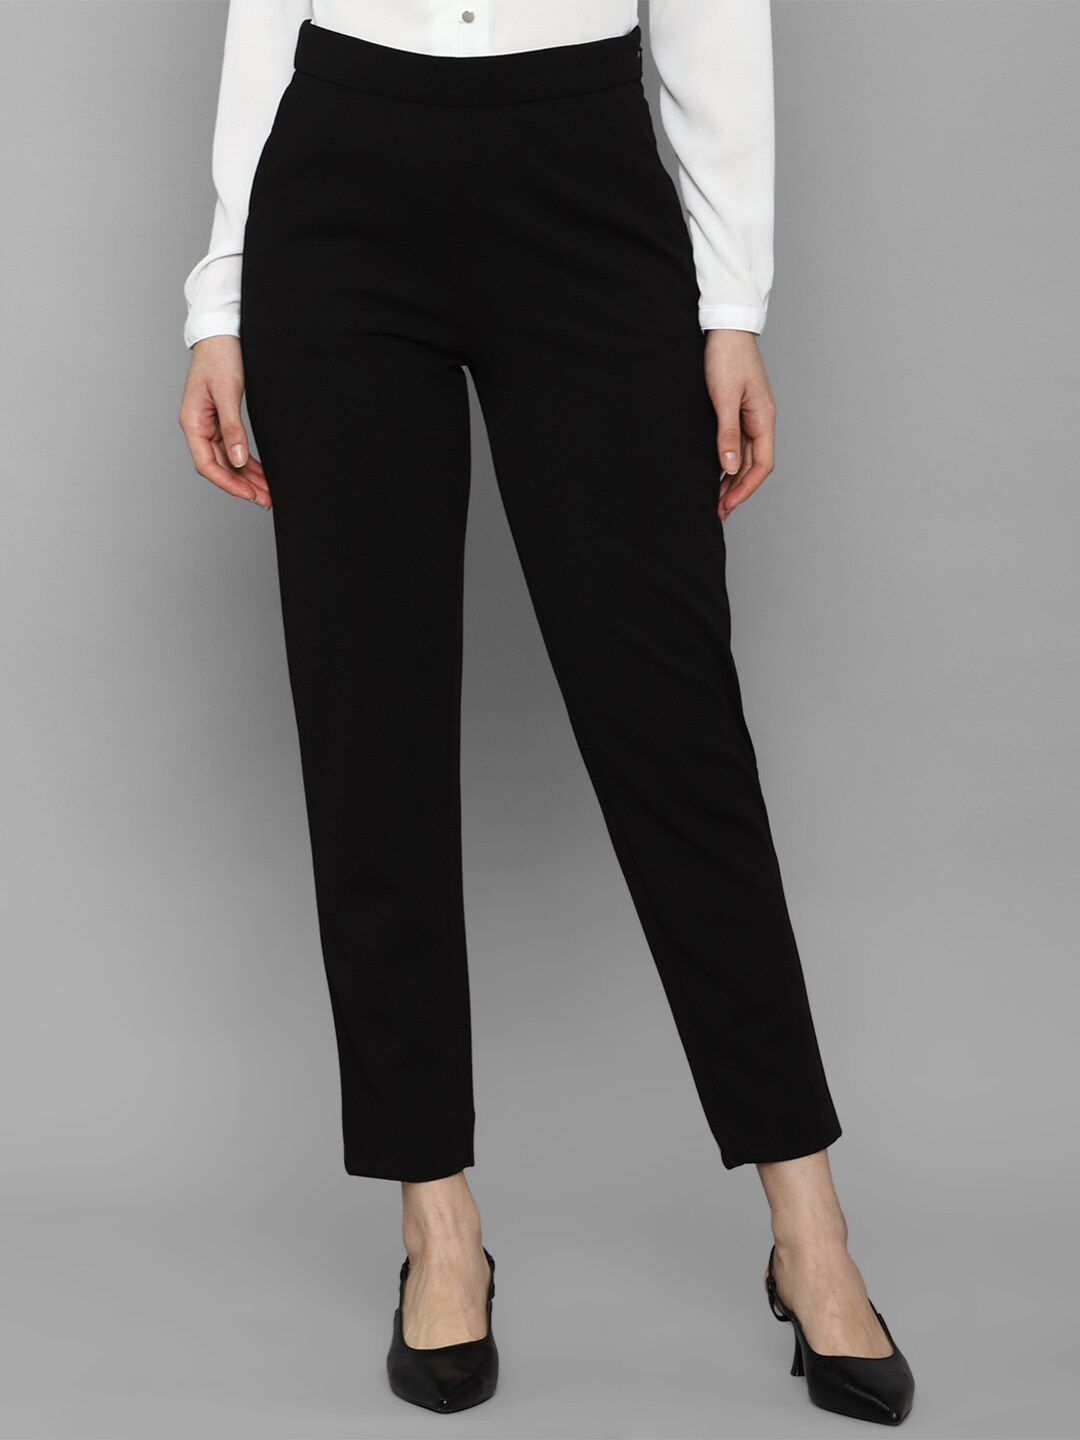 Allen Solly Woman Women Black Solid Trouser Price in India